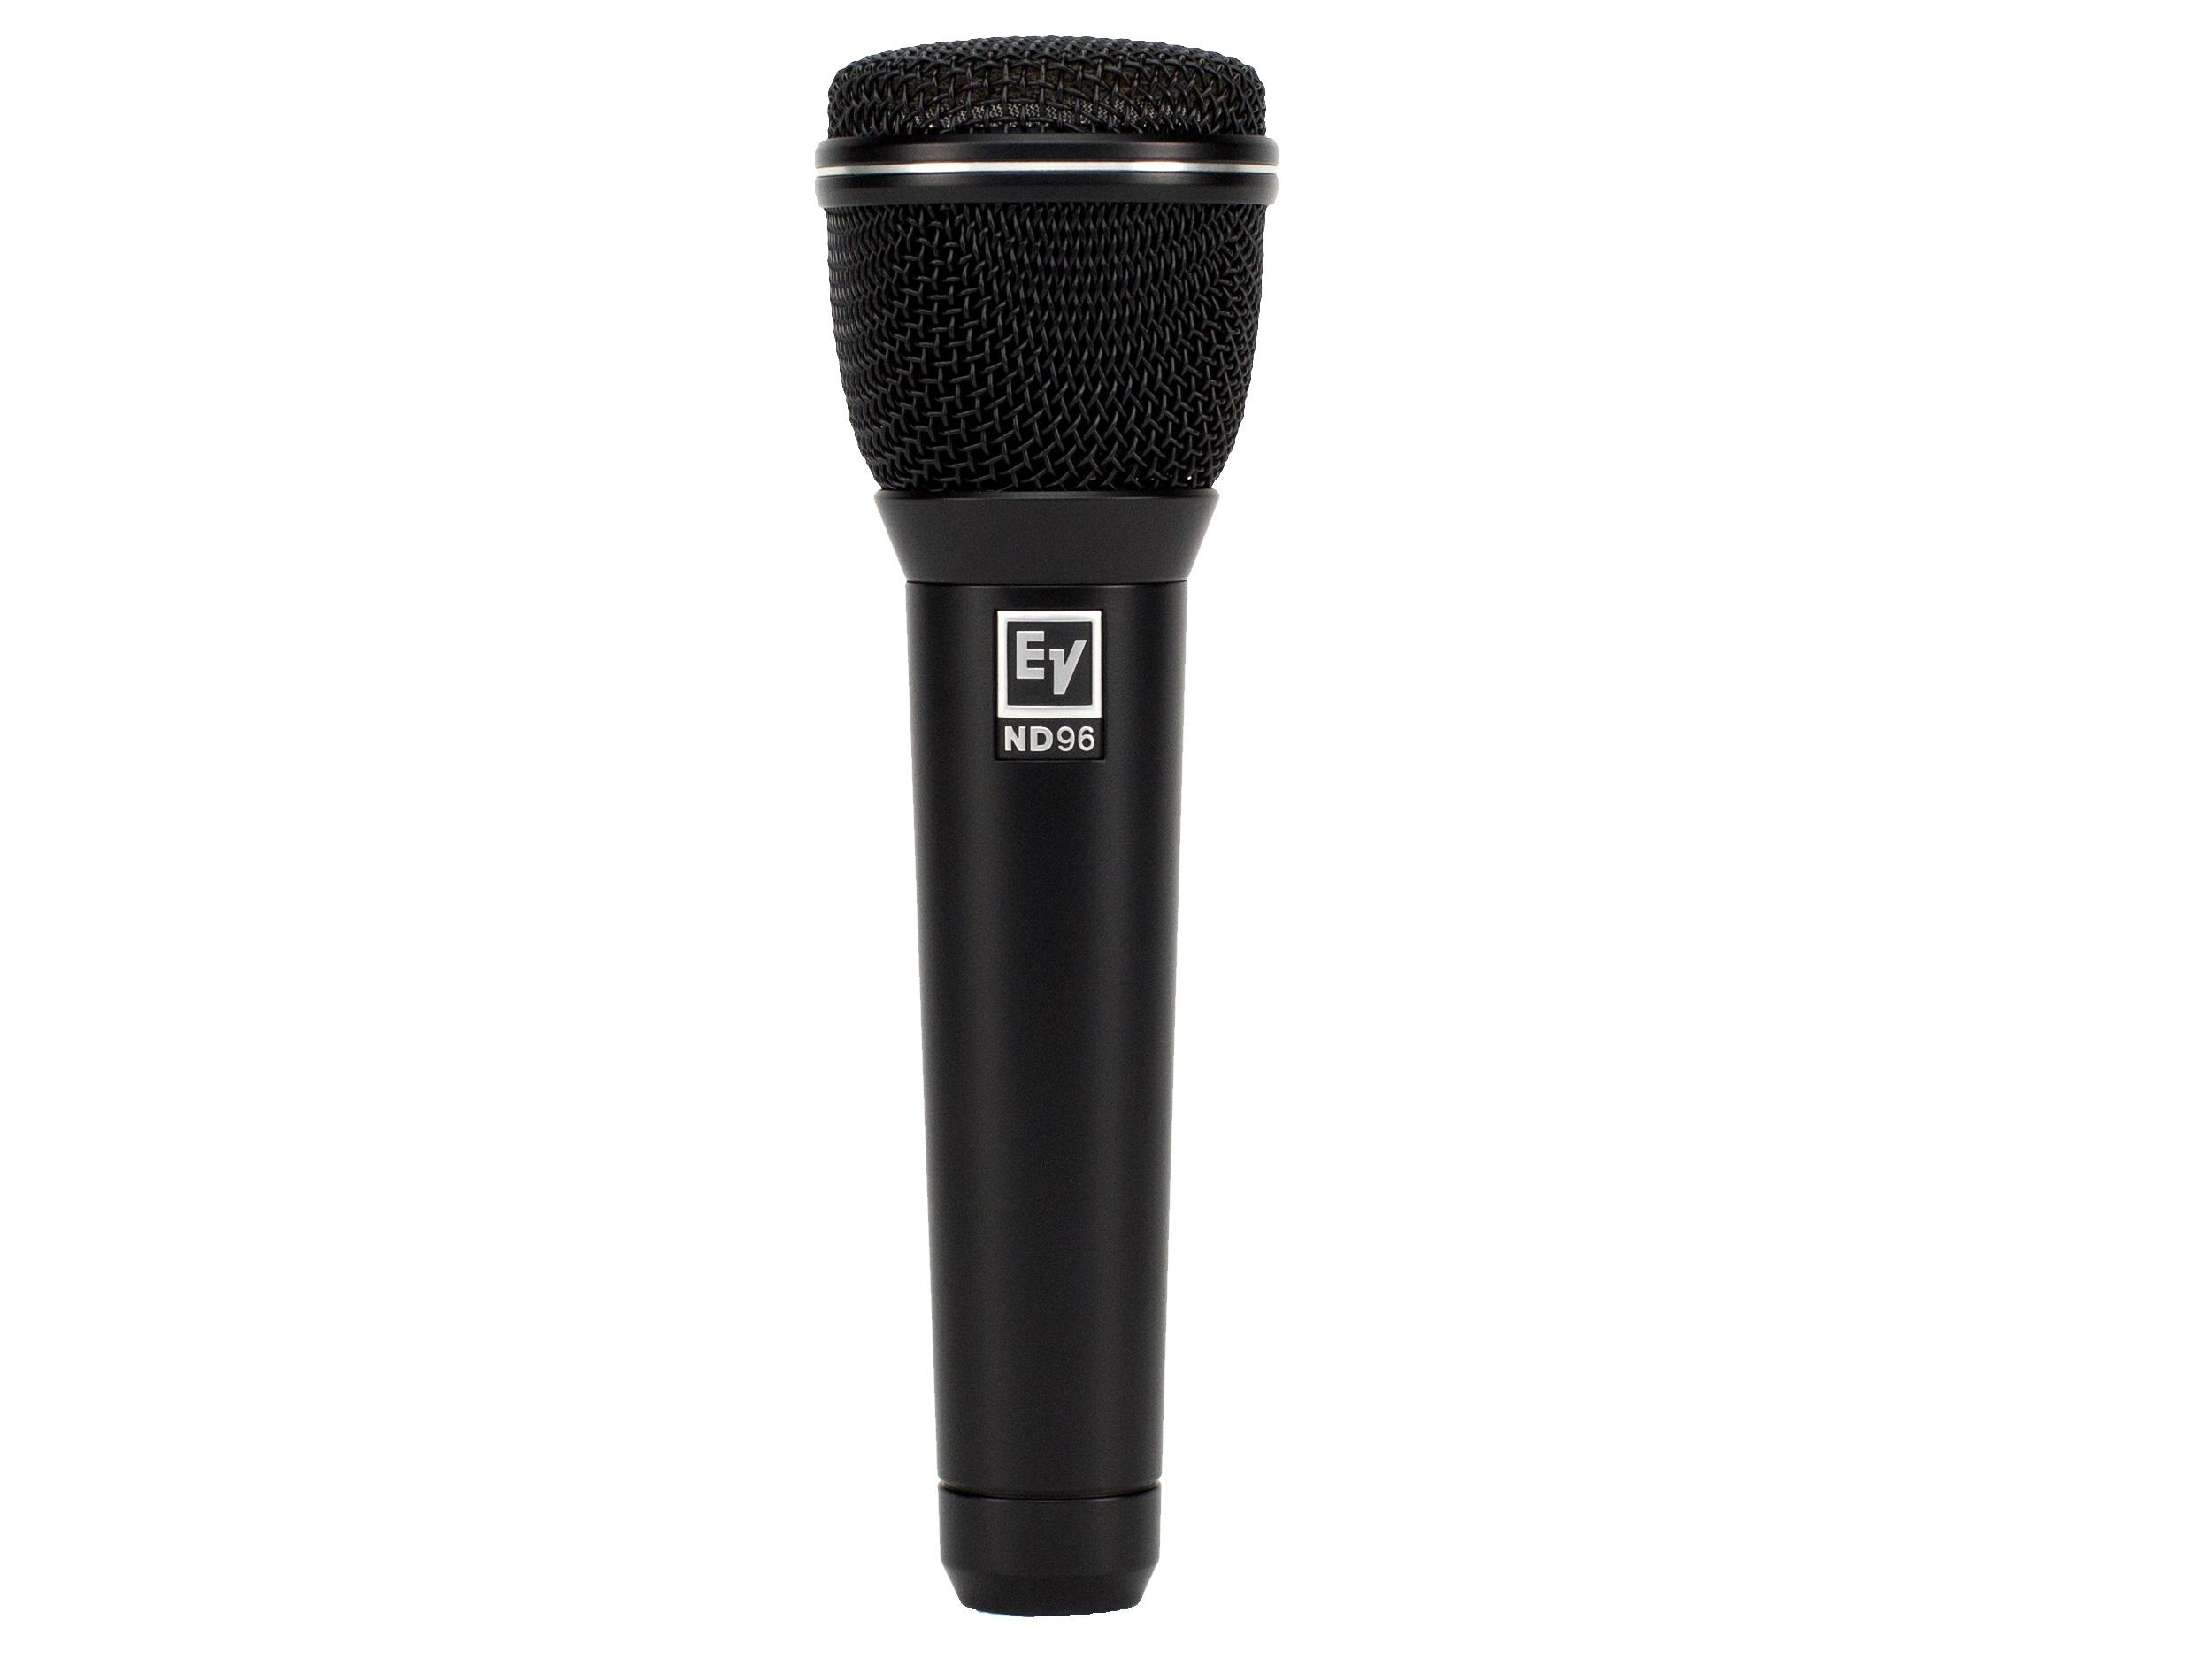 ND96 6.69 inch Supercardioid Dynamic Vocal Microphone by Electro-Voice